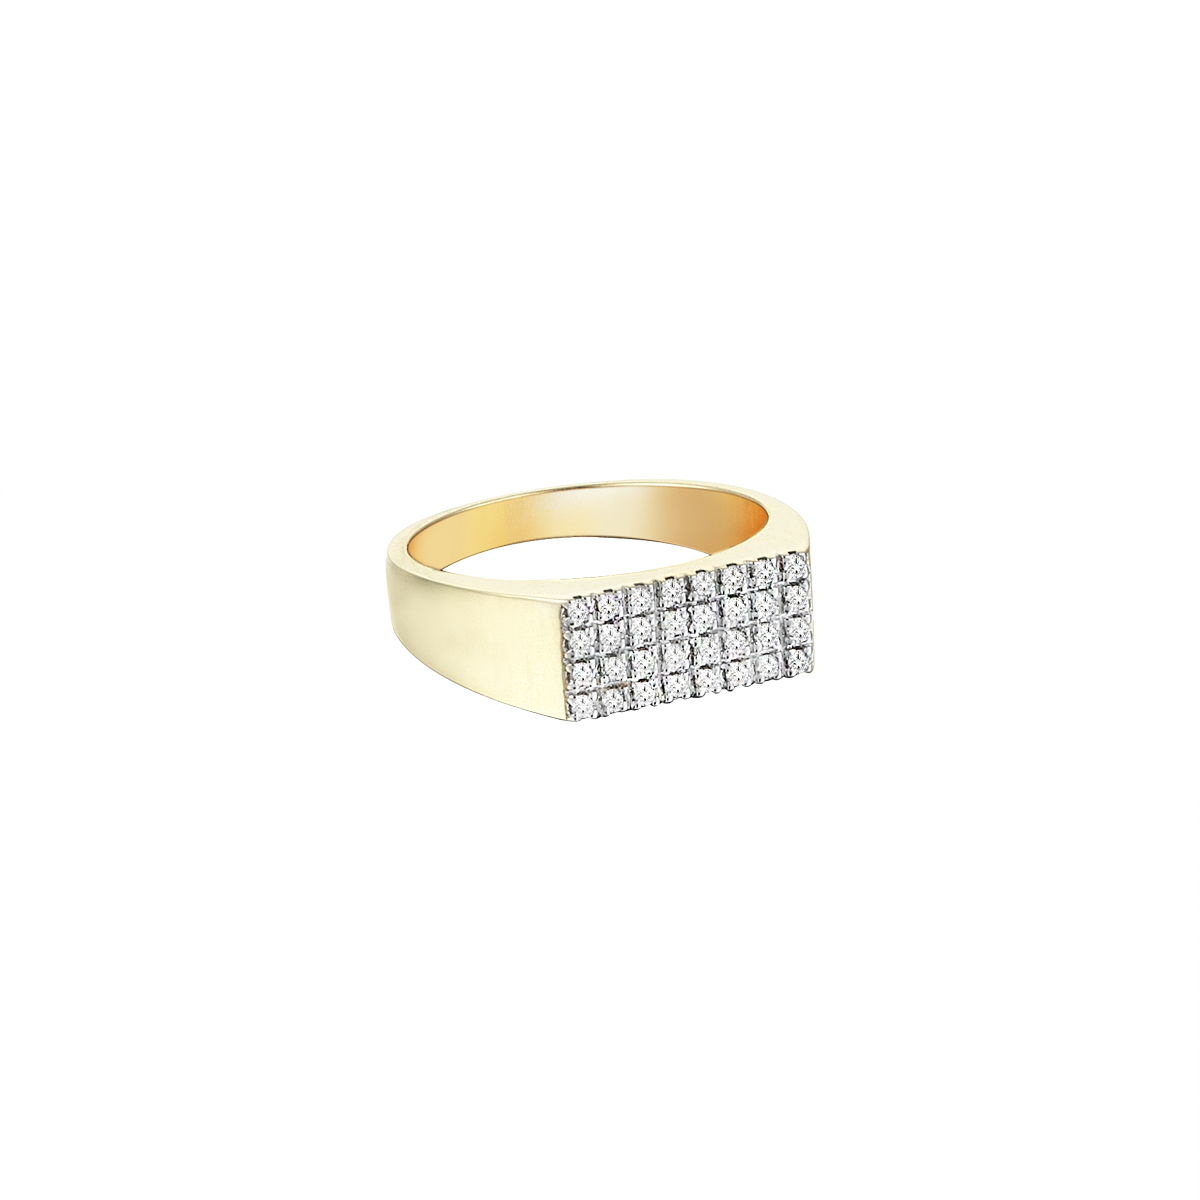 Pave Rectangular Ring in Yellow Gold - Her Story Shop